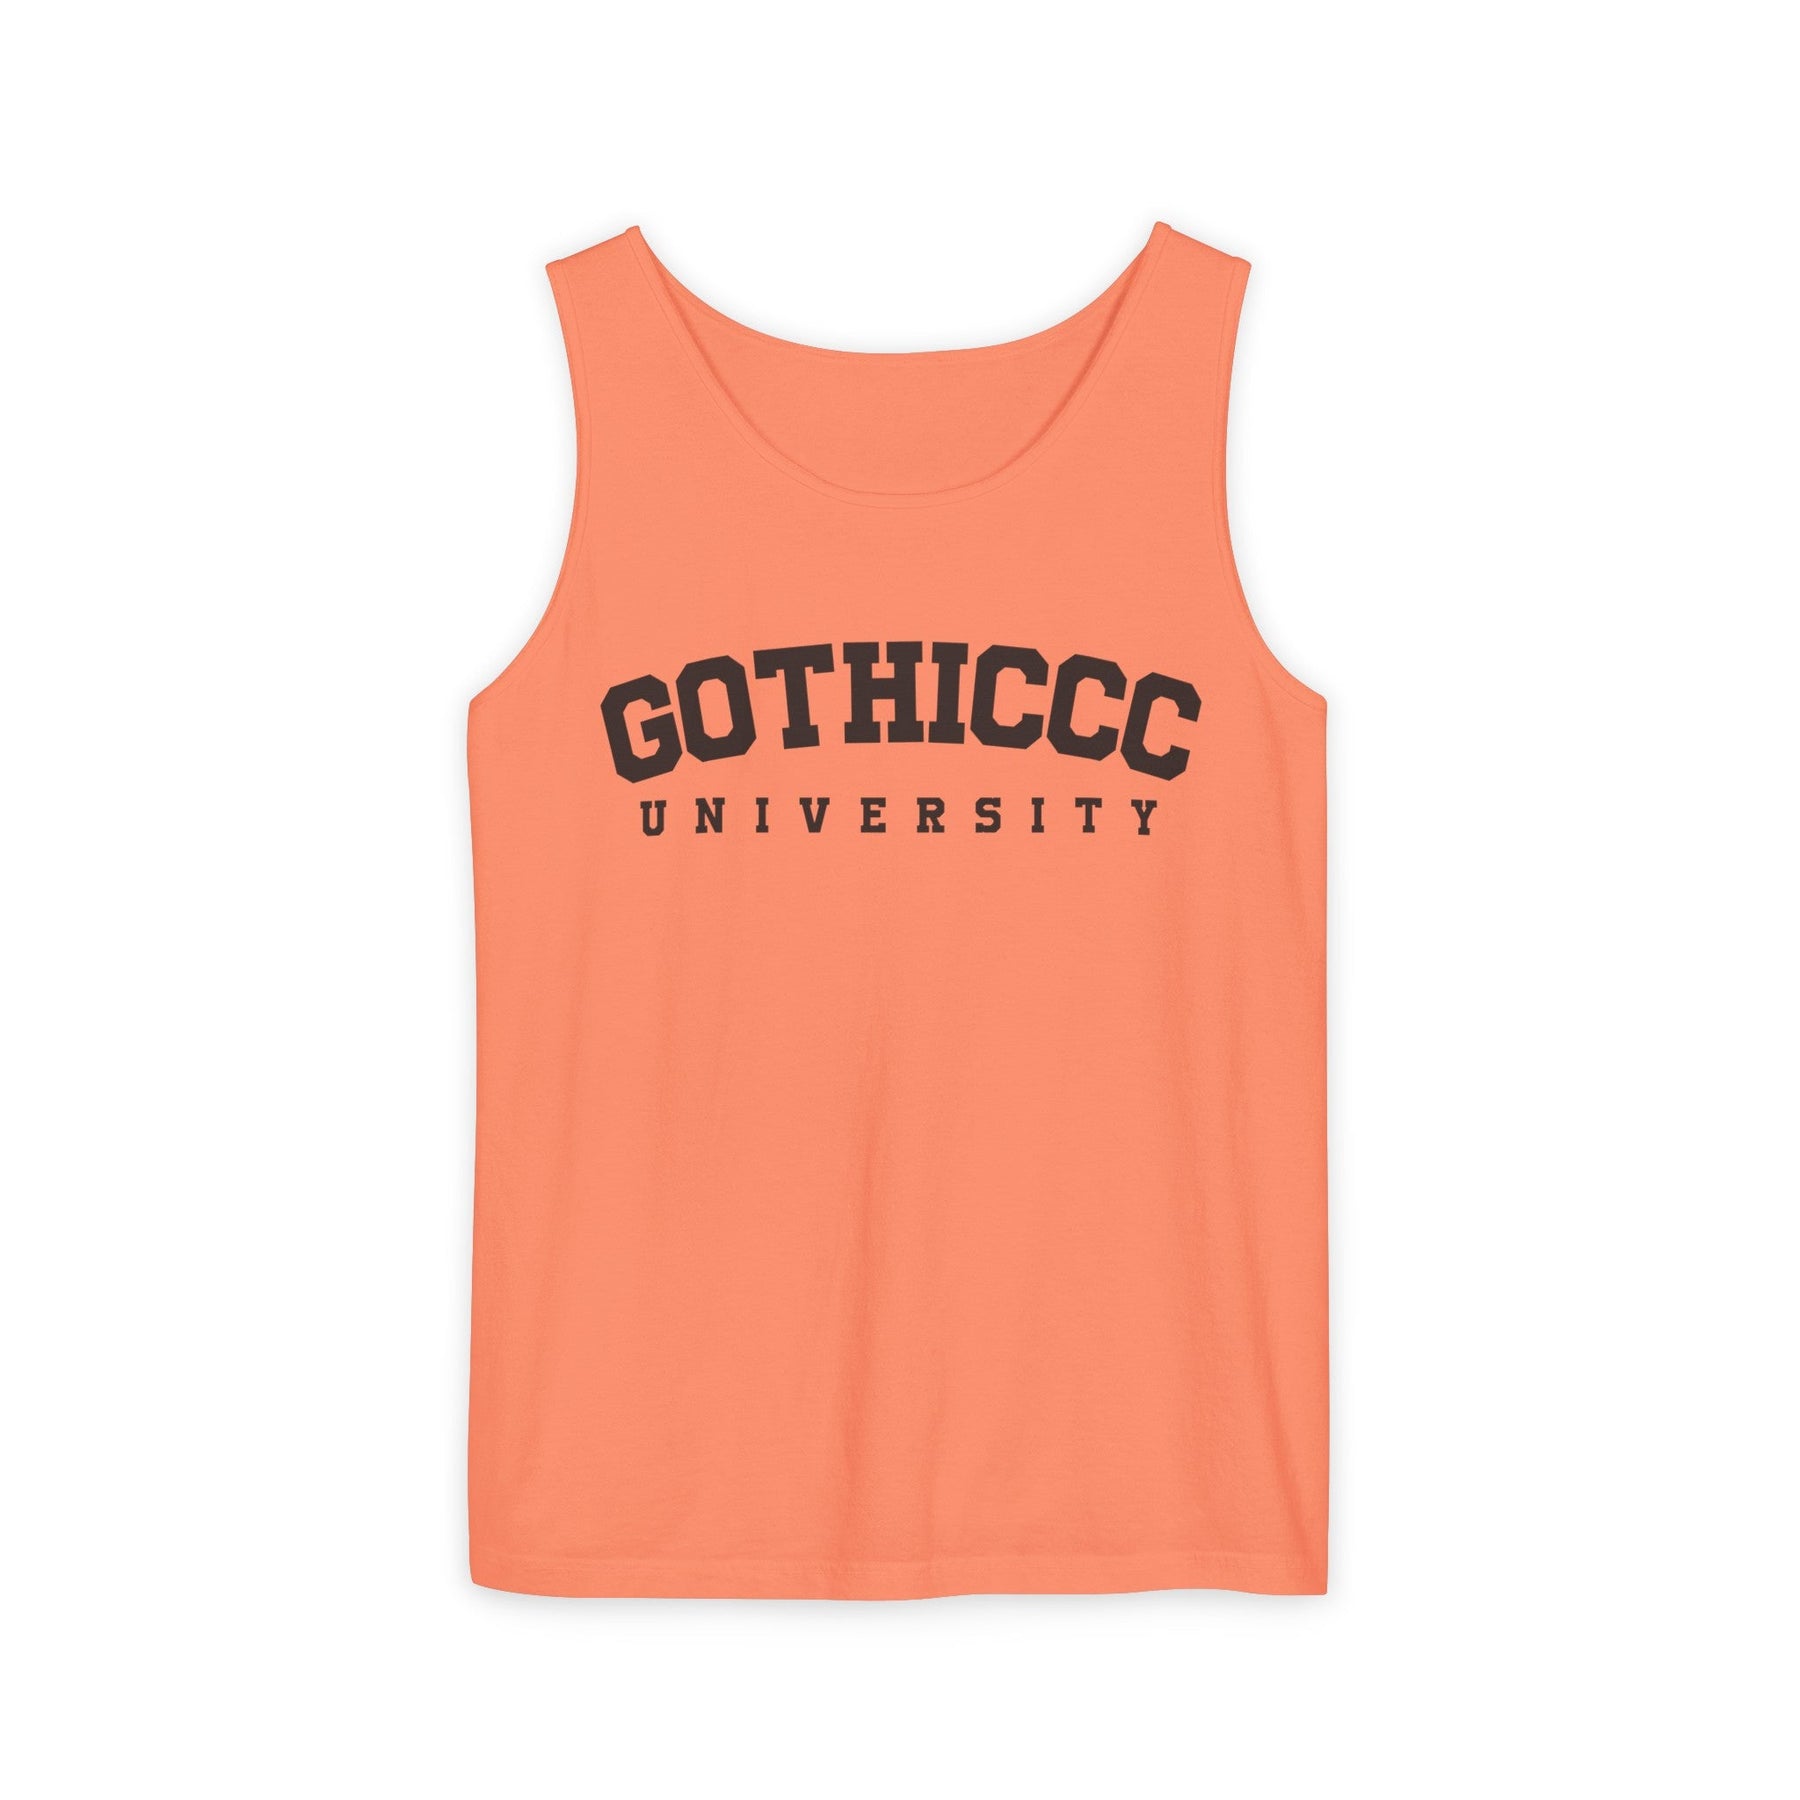 Gothiccc University Unisex Tank Top - Goth Cloth Co.Tank Top65634837297949591912